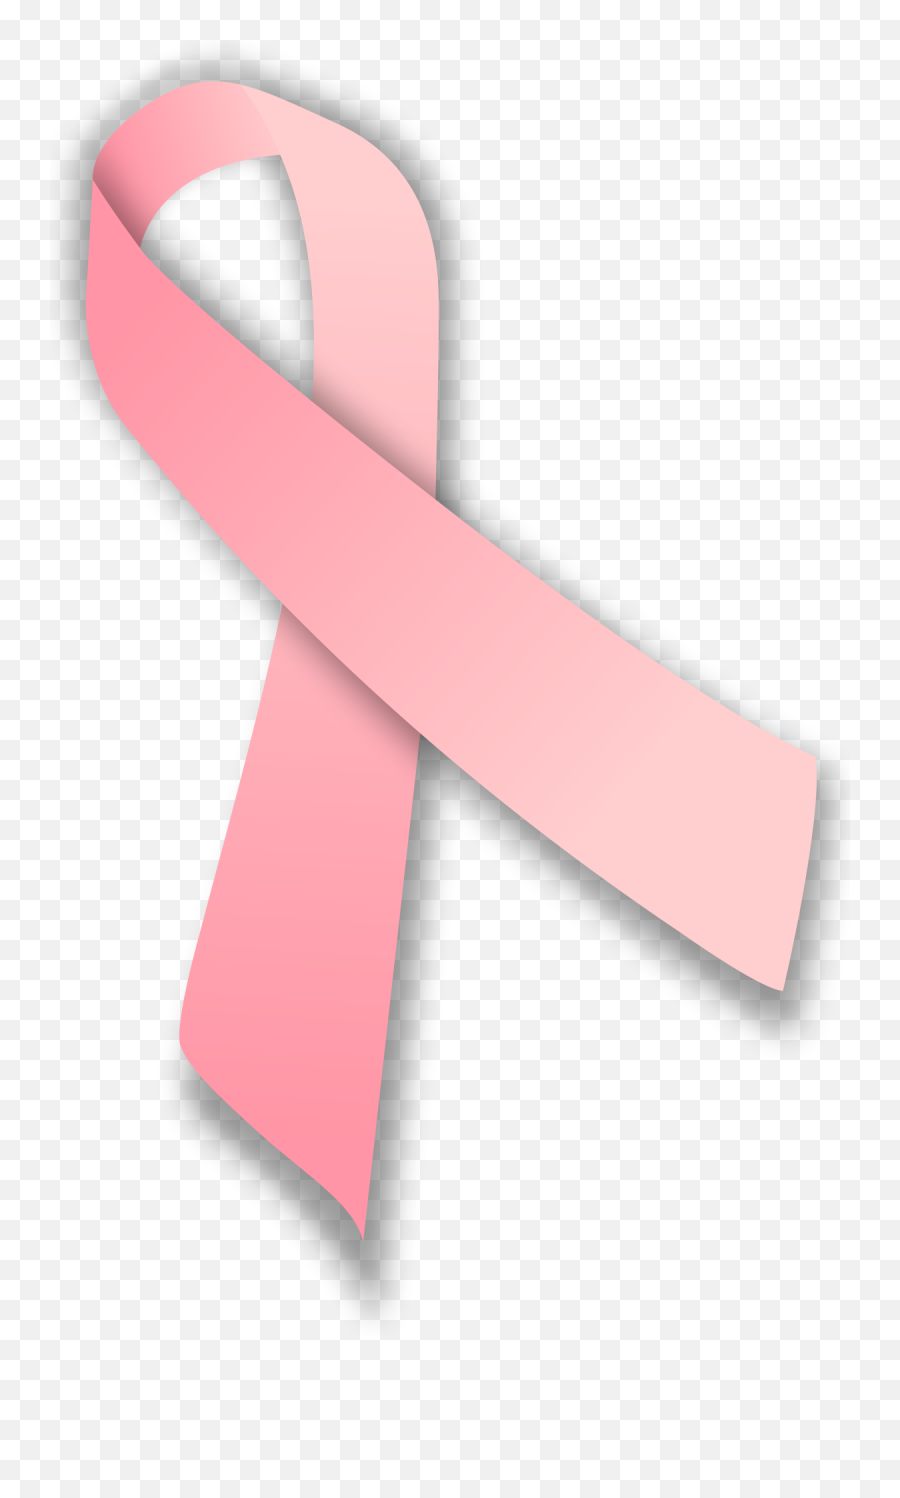 National Breast Cancer Awareness Month - Simbolo De Cancer De Cuello Uterino Png,Breast Cancer Logo